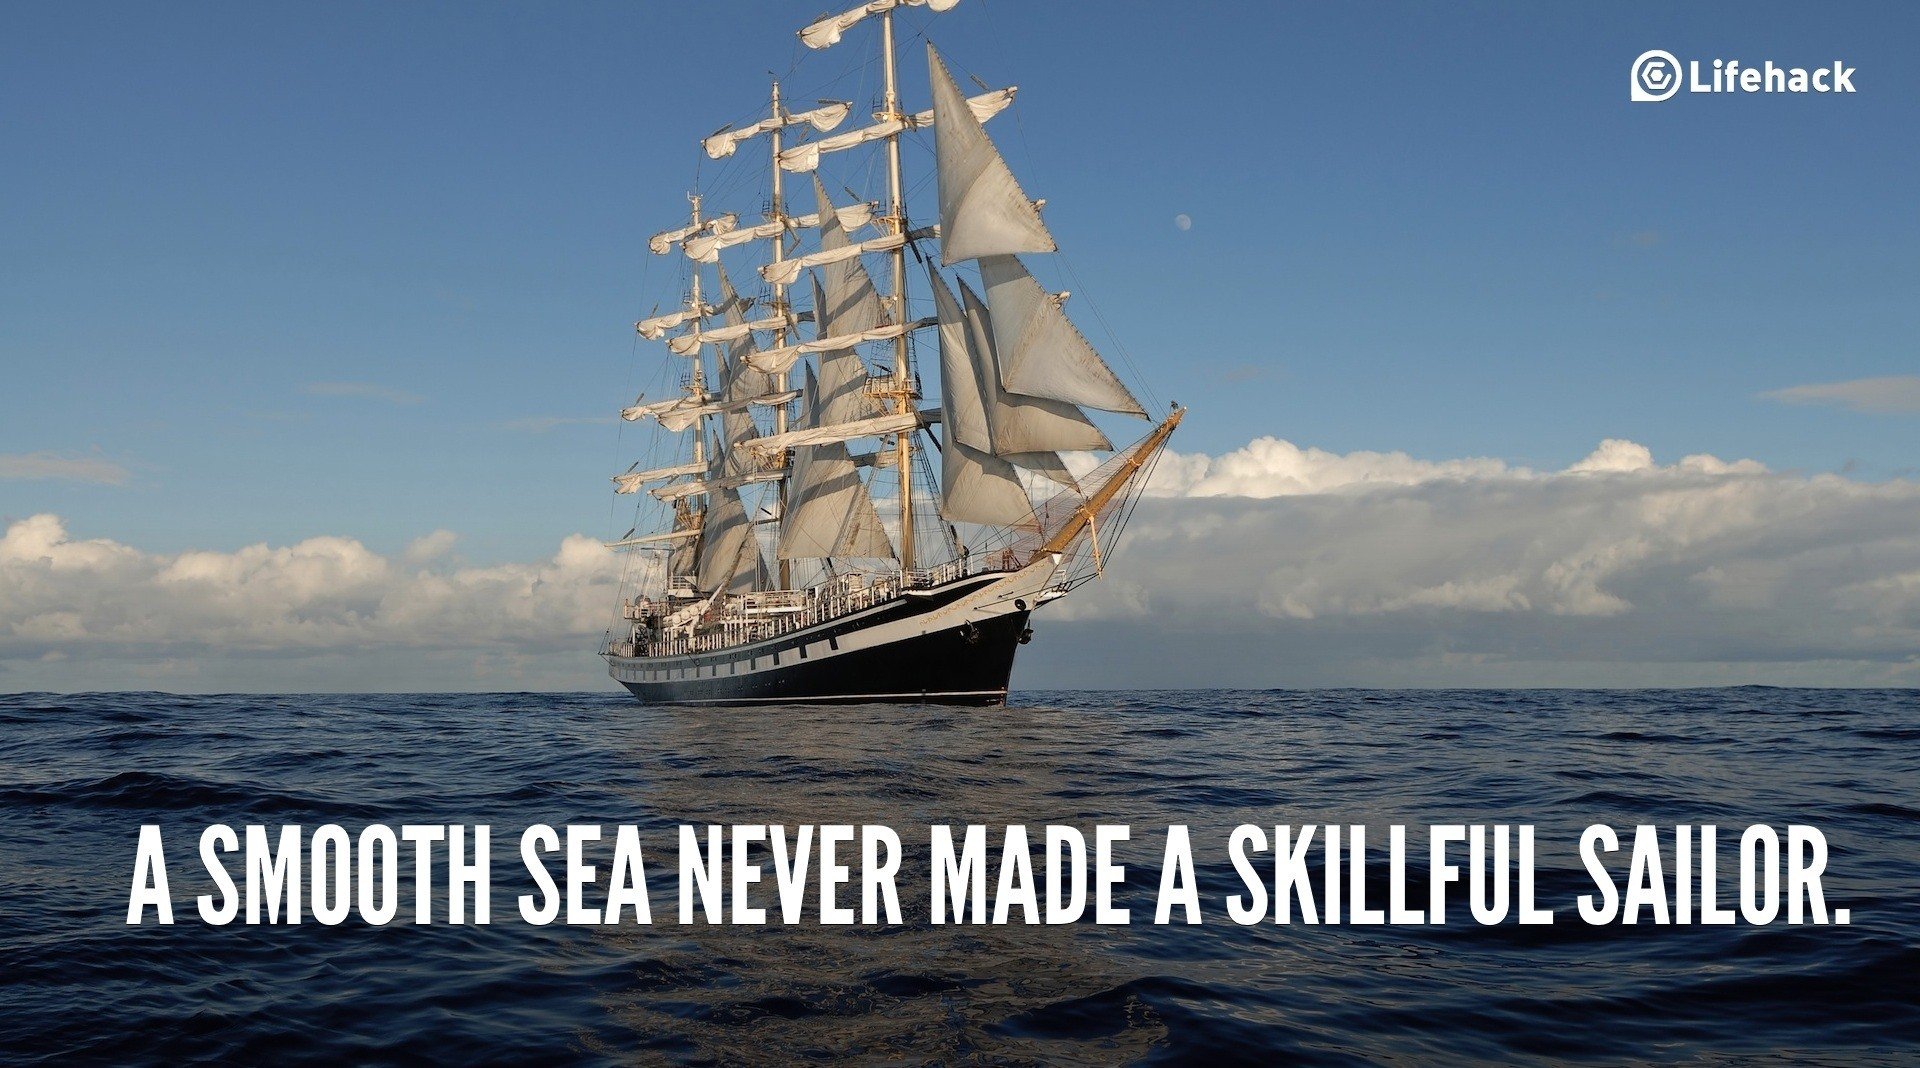 30sec Tip: A Smooth Sea Never Made a Skillful Sailor